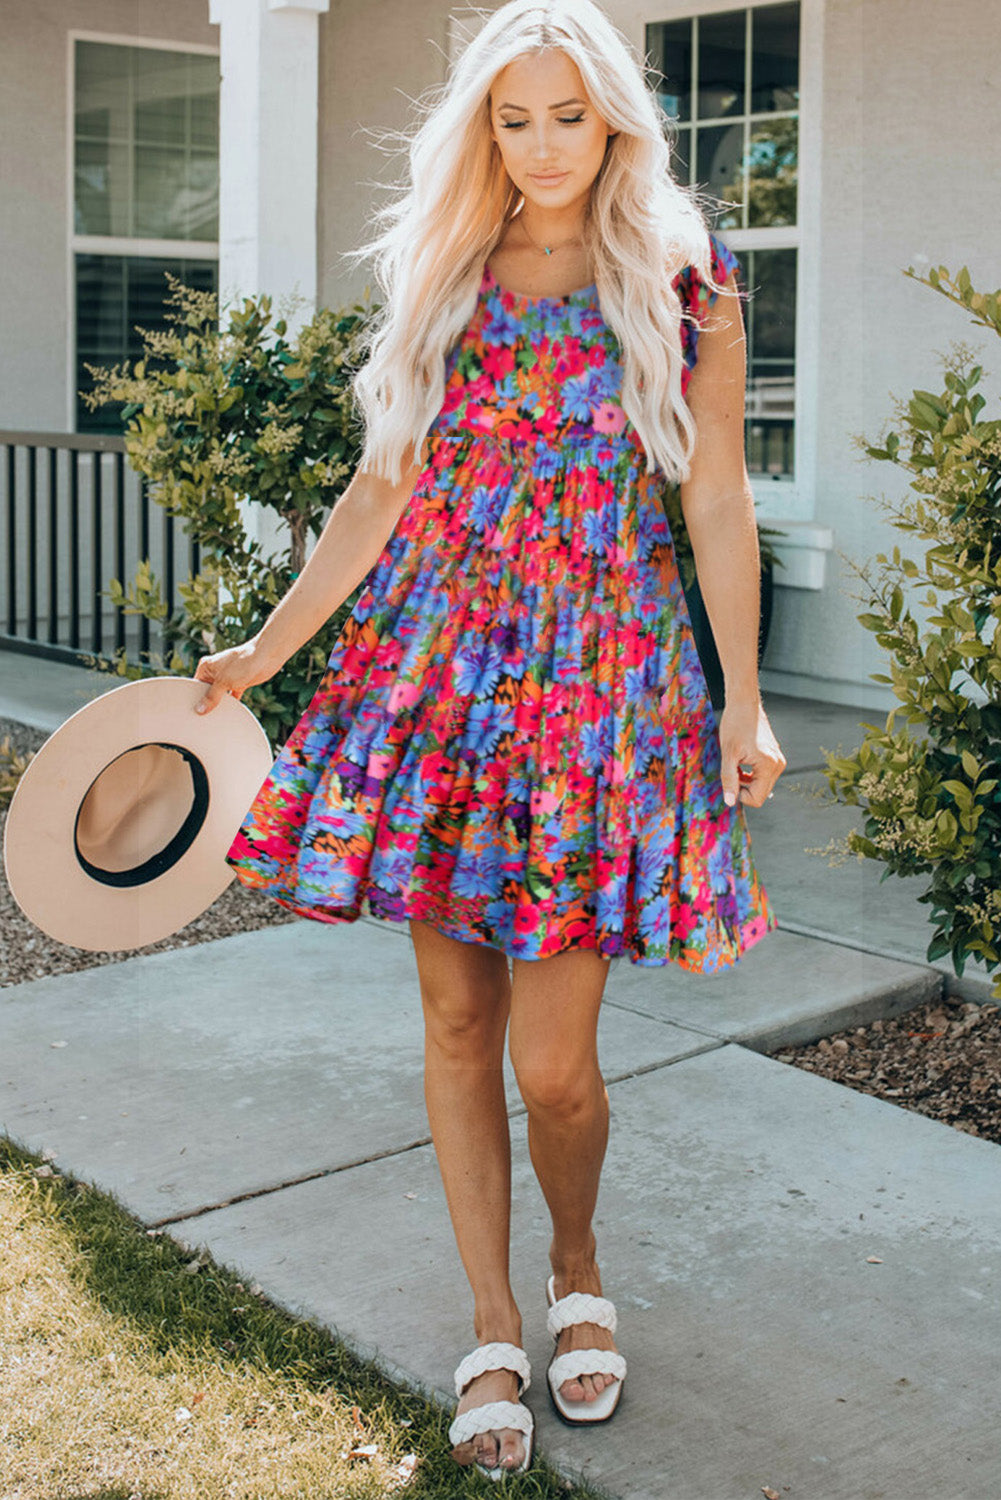 Becky's Style Floral Mini Dress